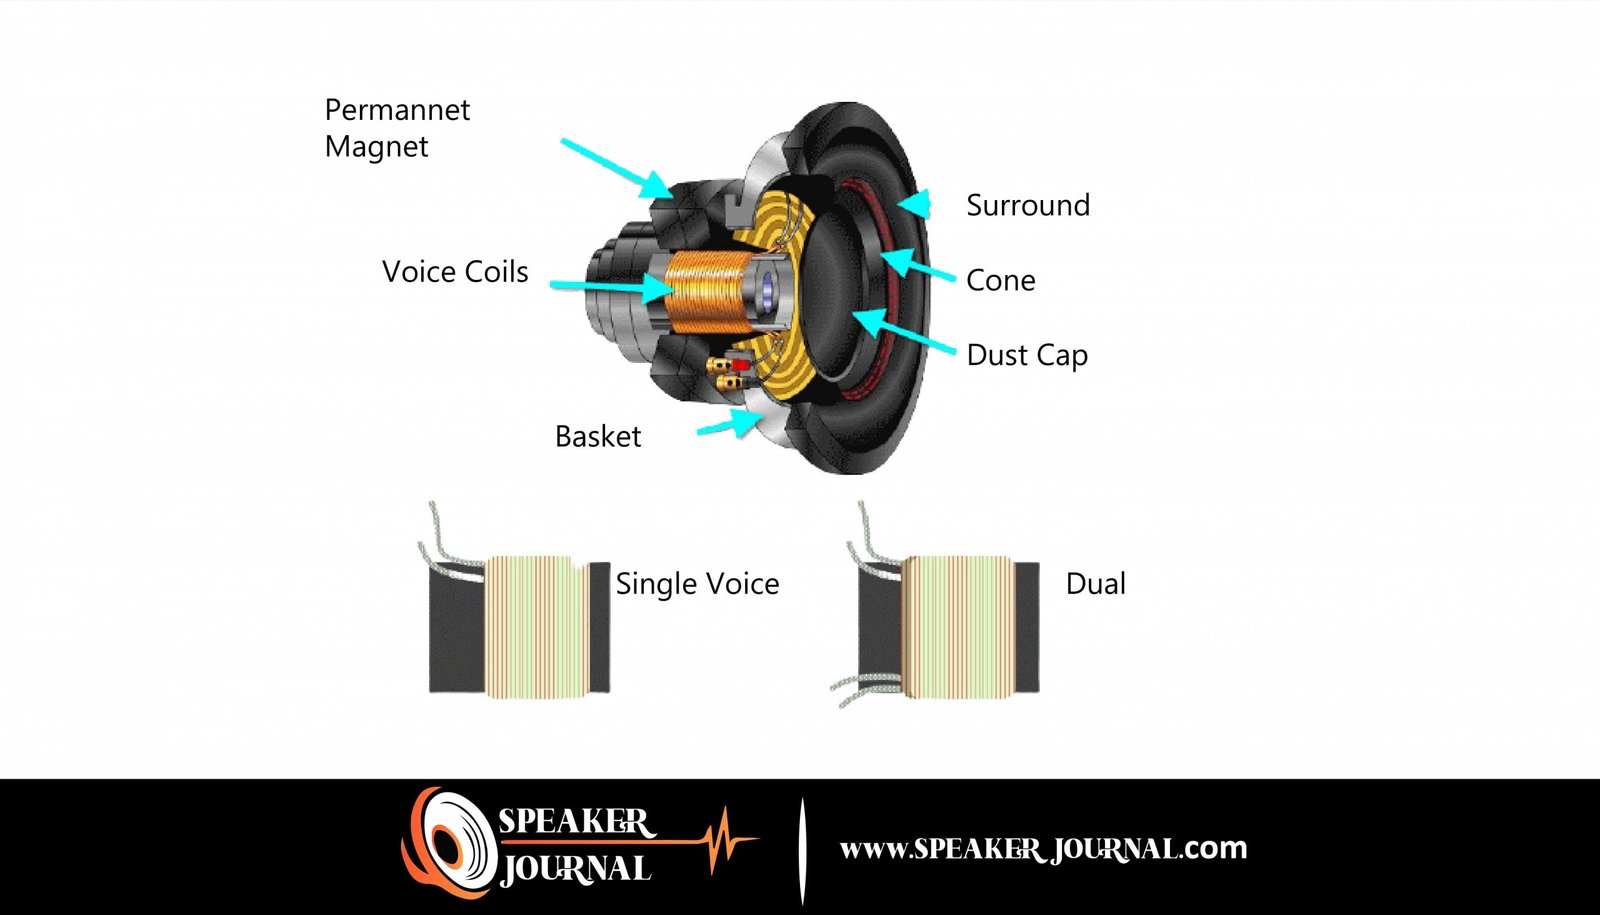 How To Wire A Dual Voice Coil Subwoofer by speakerjournal.com